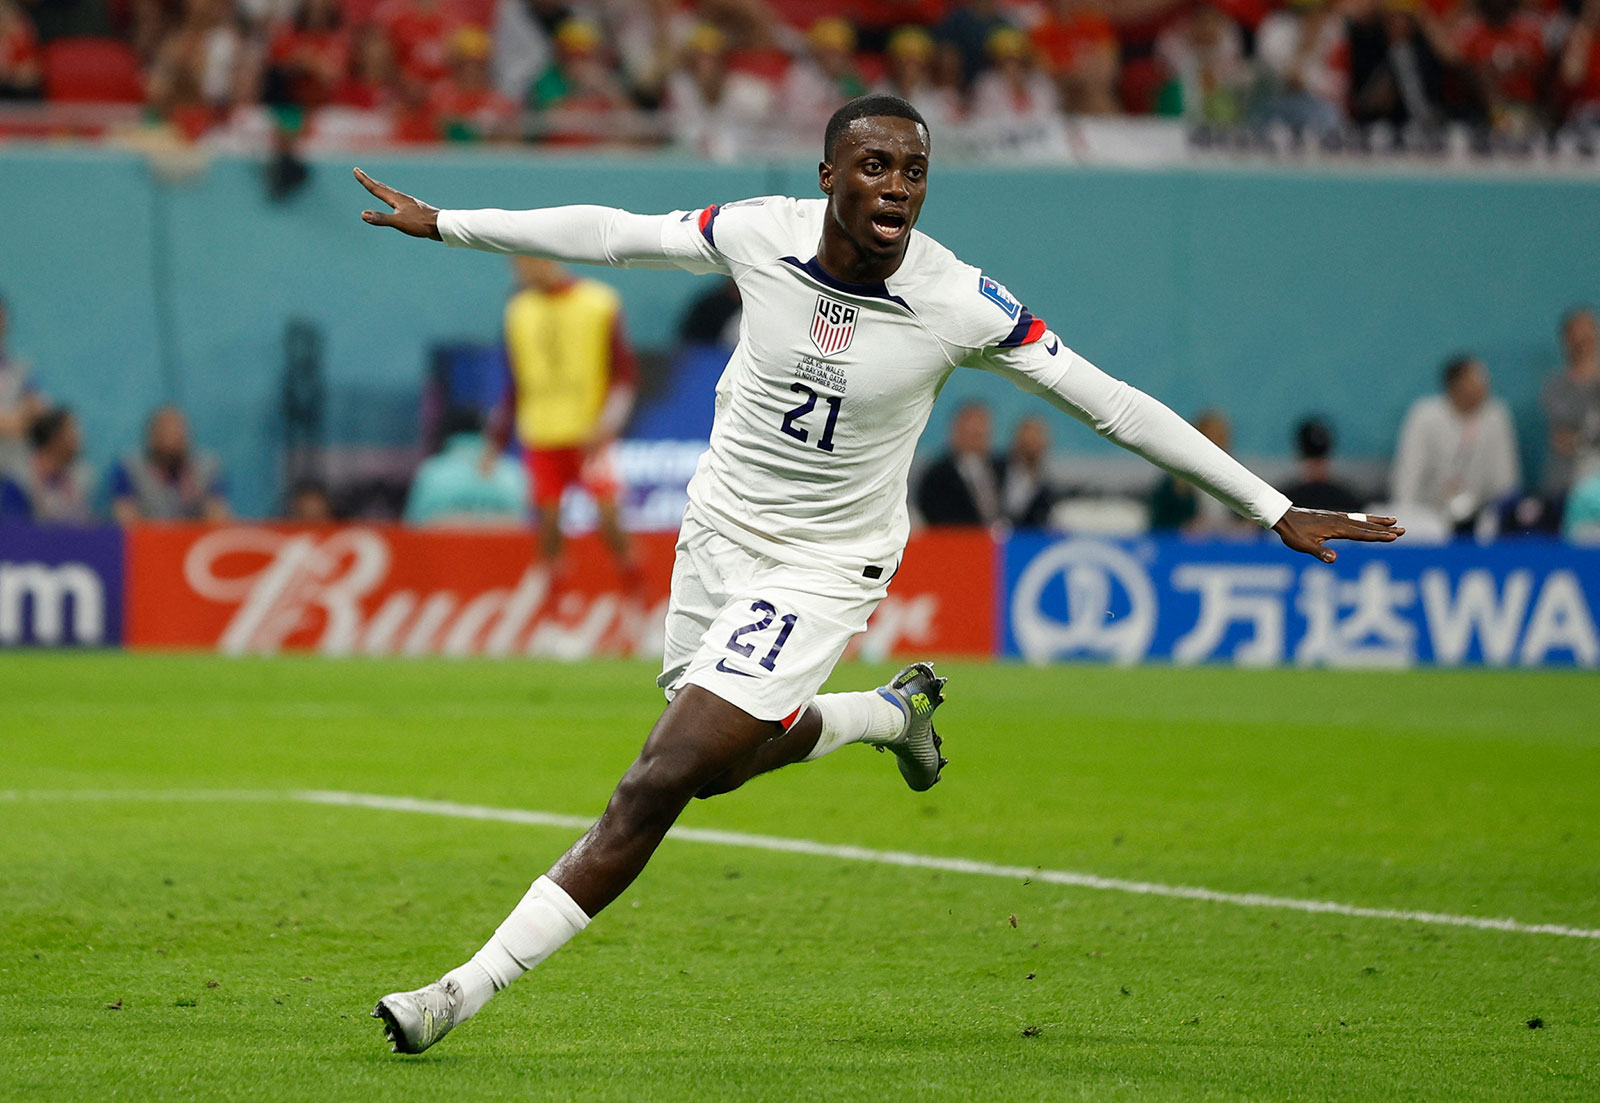 USA's Timothy Weah celebrates after scoring the first goal of the match against Wales on November 21.